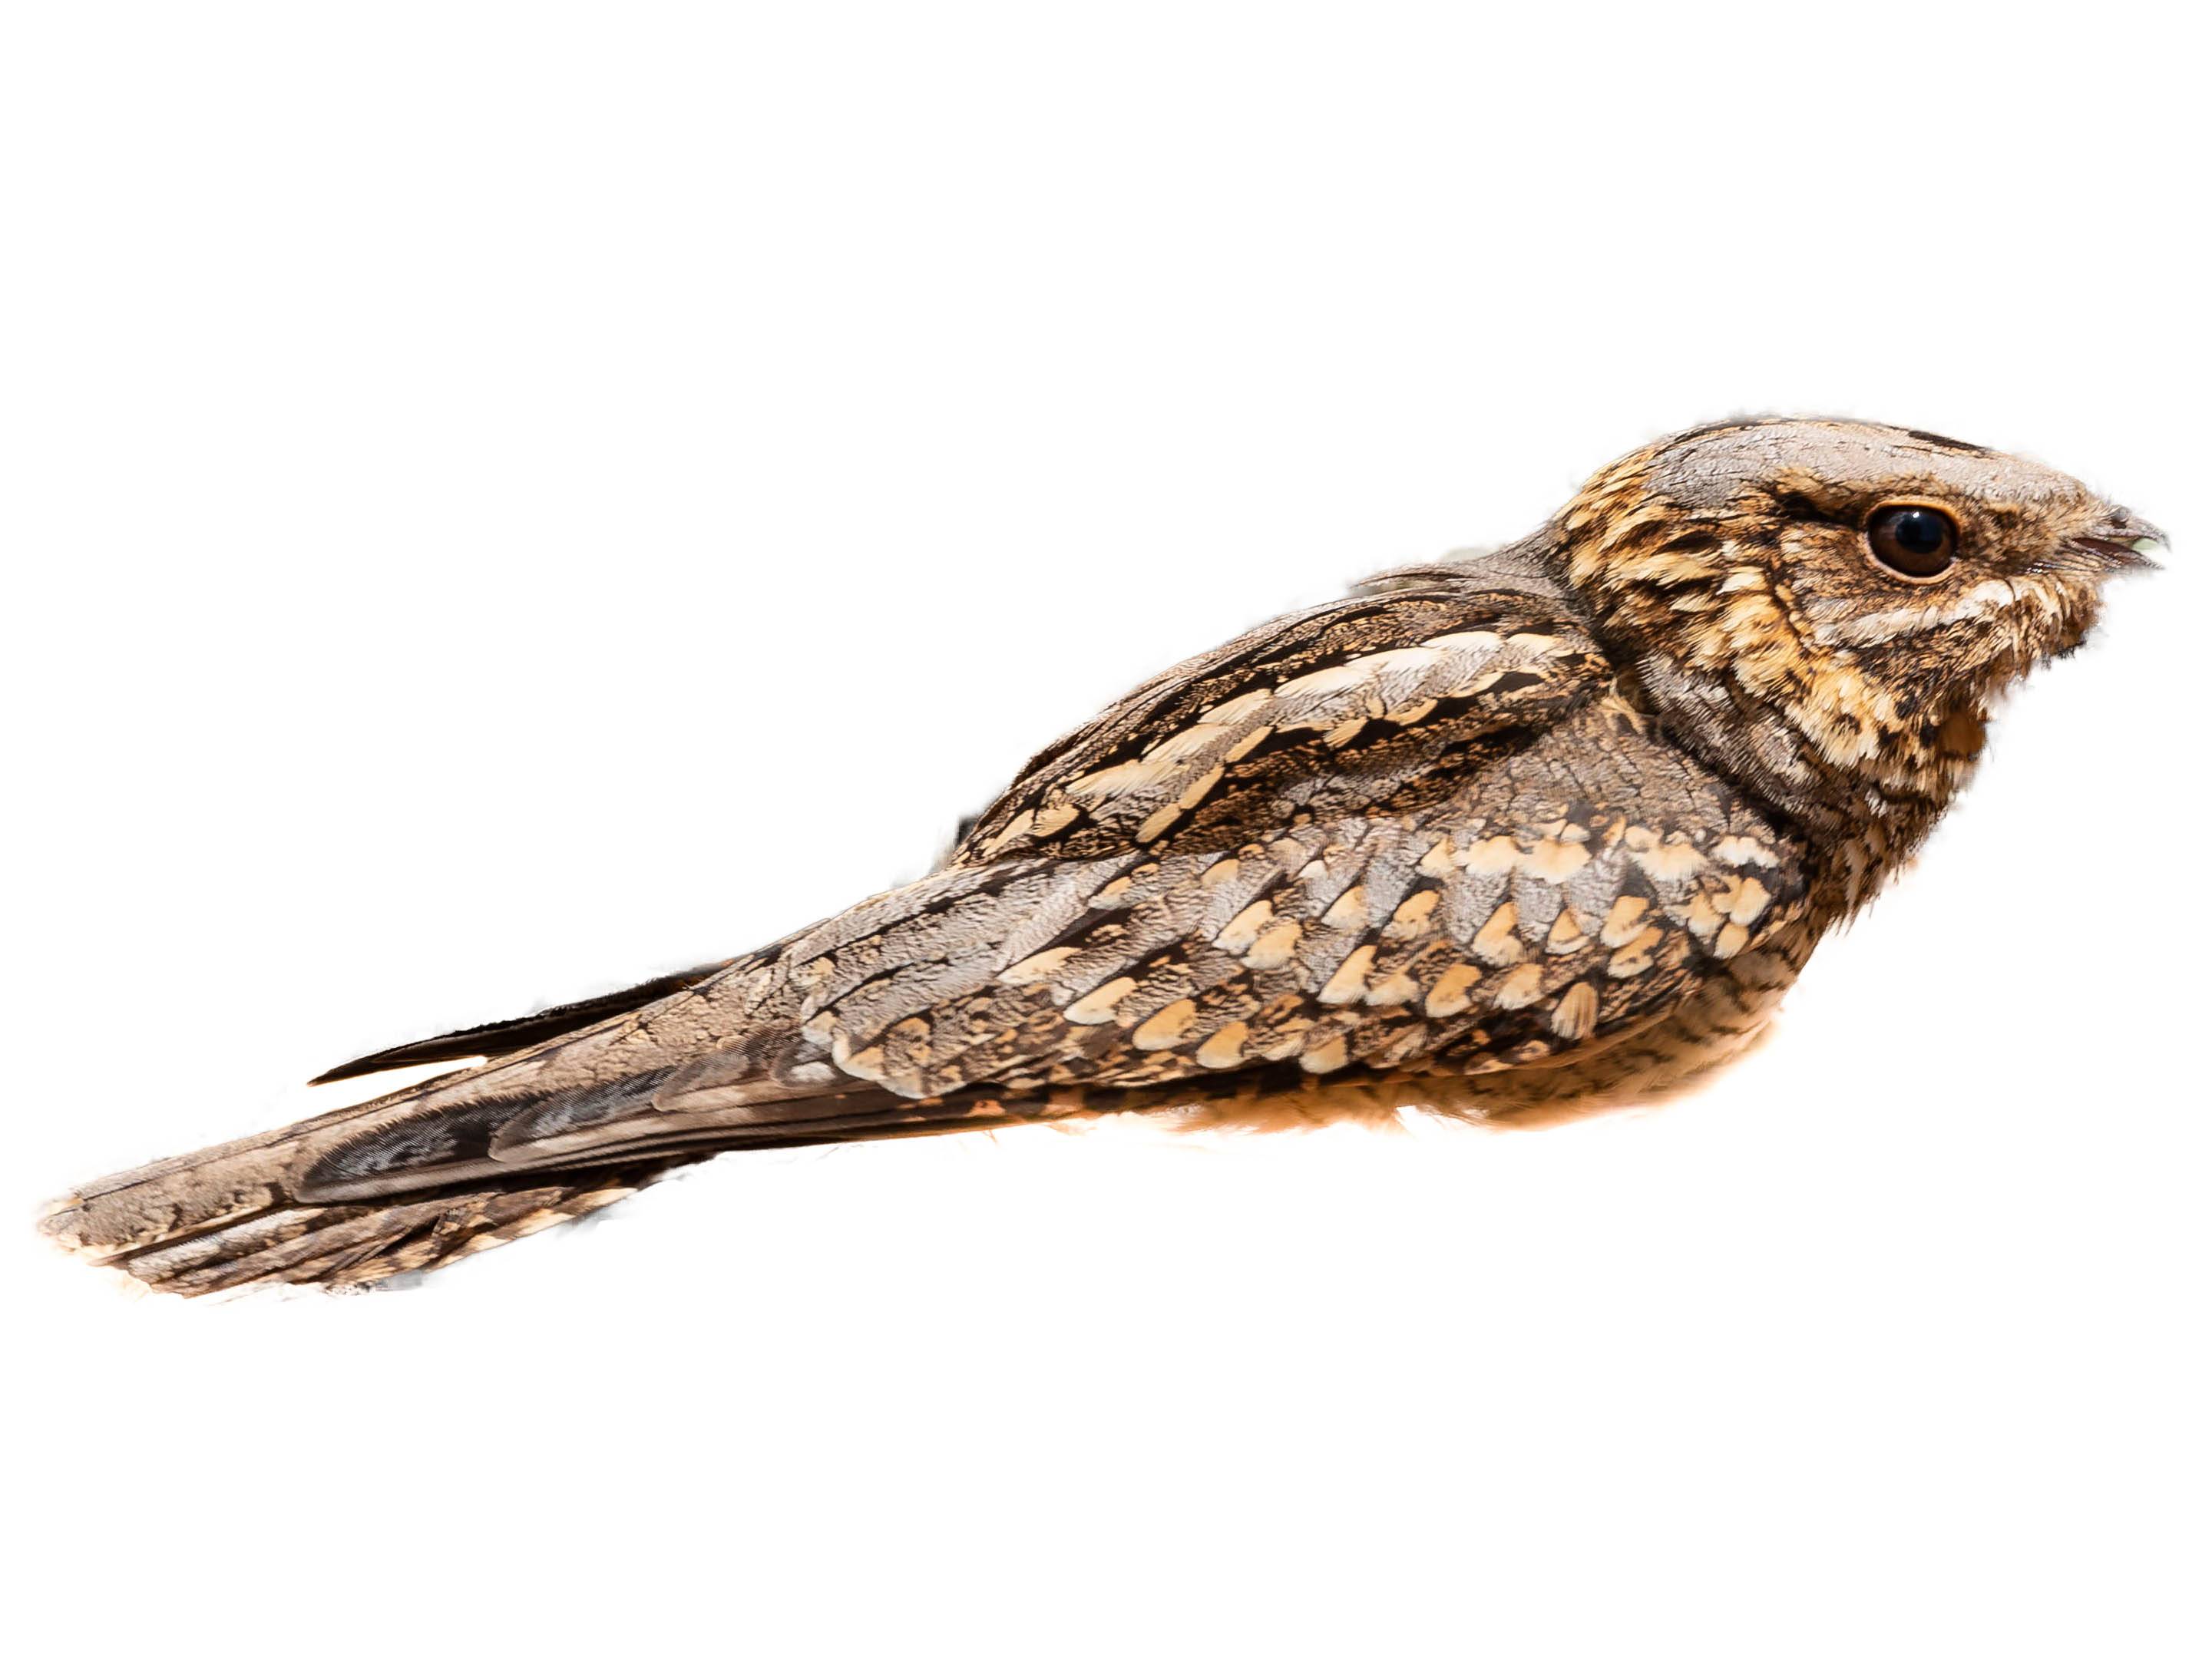 A photo of a Red-necked Nightjar (Caprimulgus ruficollis)